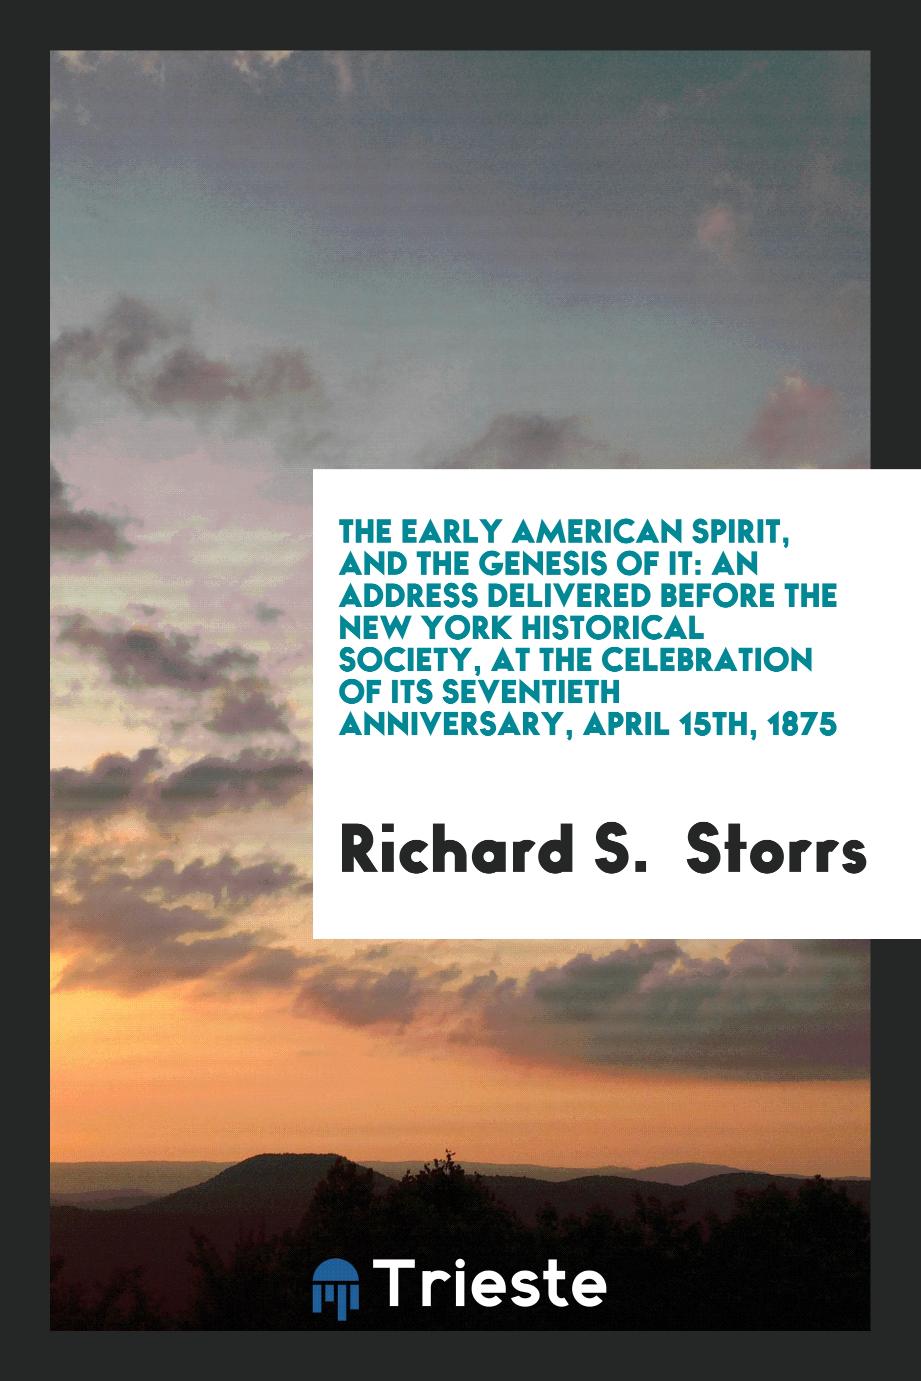 The Early American Spirit, and the Genesis of it: An Address Delivered Before the New York Historical Society, at the celebration of its seventieth anniversary, April 15th, 1875